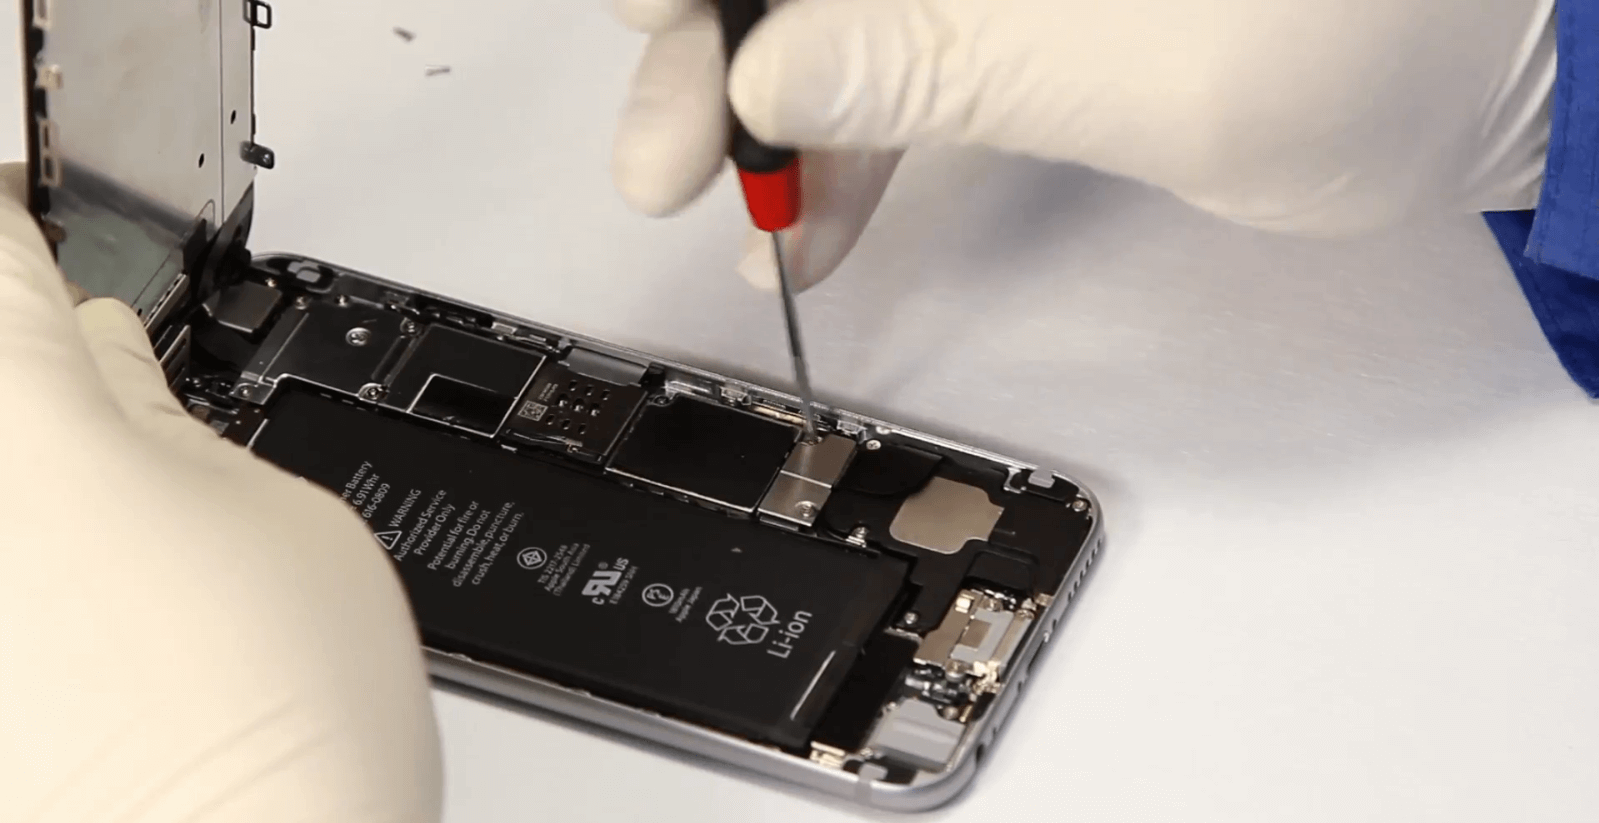 iPhone 6 battery replacement kit. How to remove battery from iPhone 6 in 2020 - The Battery ...